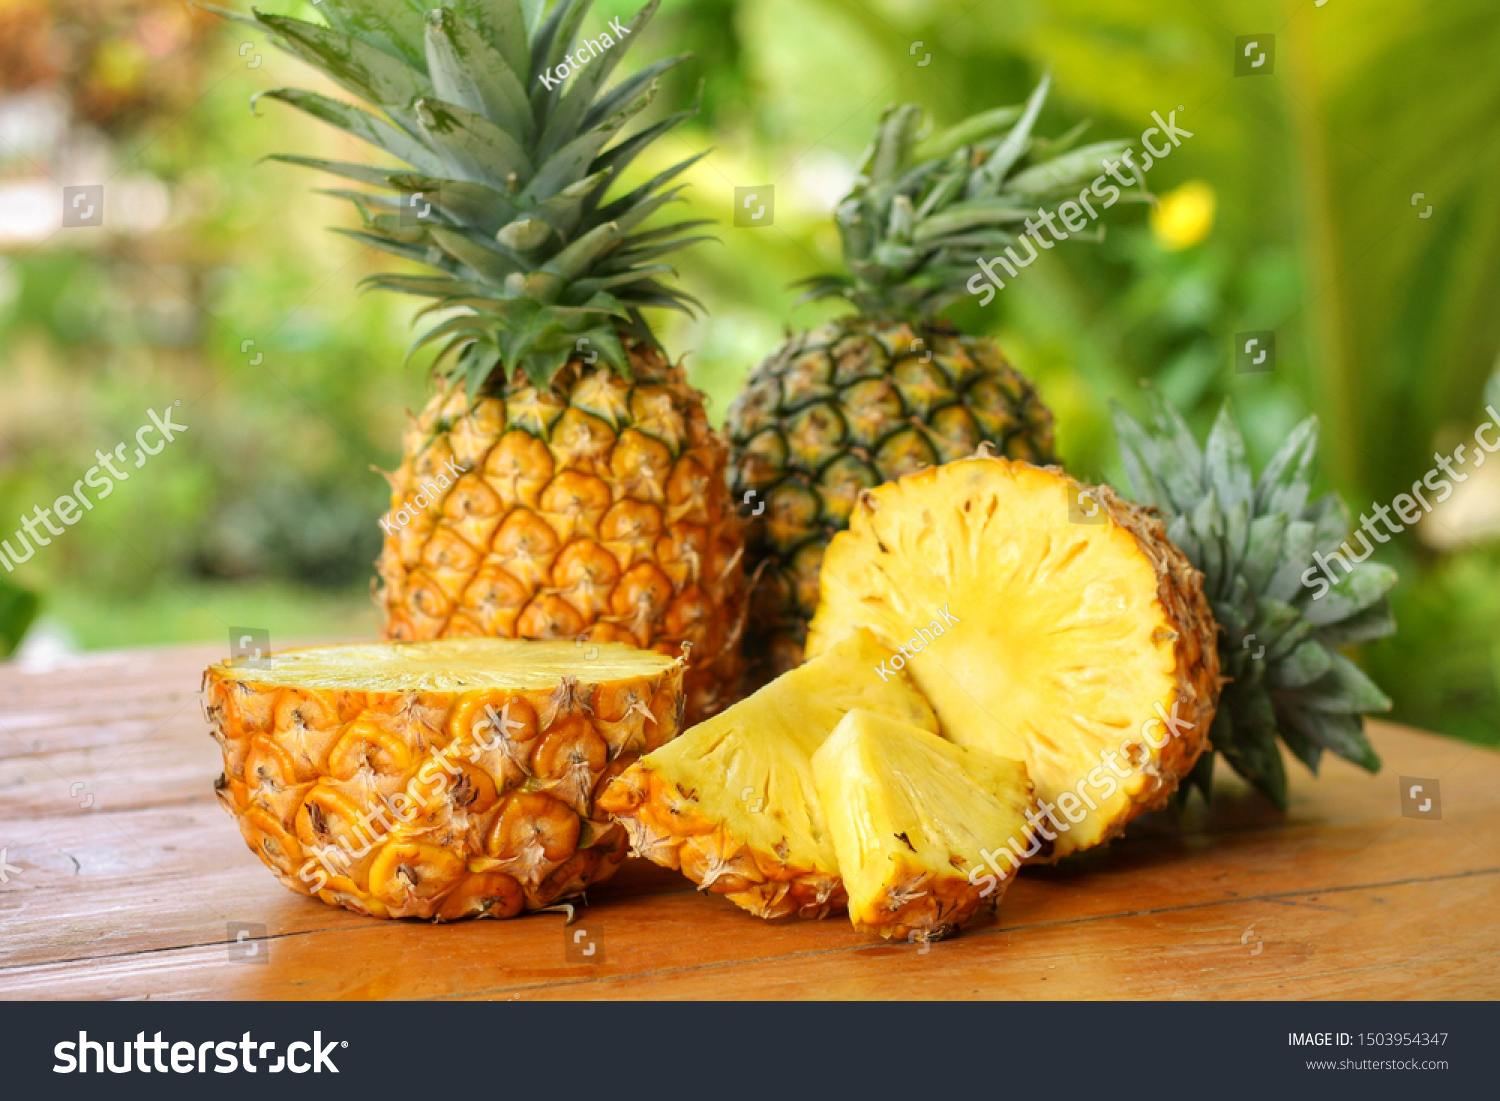 Sliced and half of Pineapple(Ananas comosus) on wooden table with blurred garden background.Sweet,sour and juicy taste.Have a lot of fiber,vitamins C and minerals.Fruits or healthcare concept. #1503954347